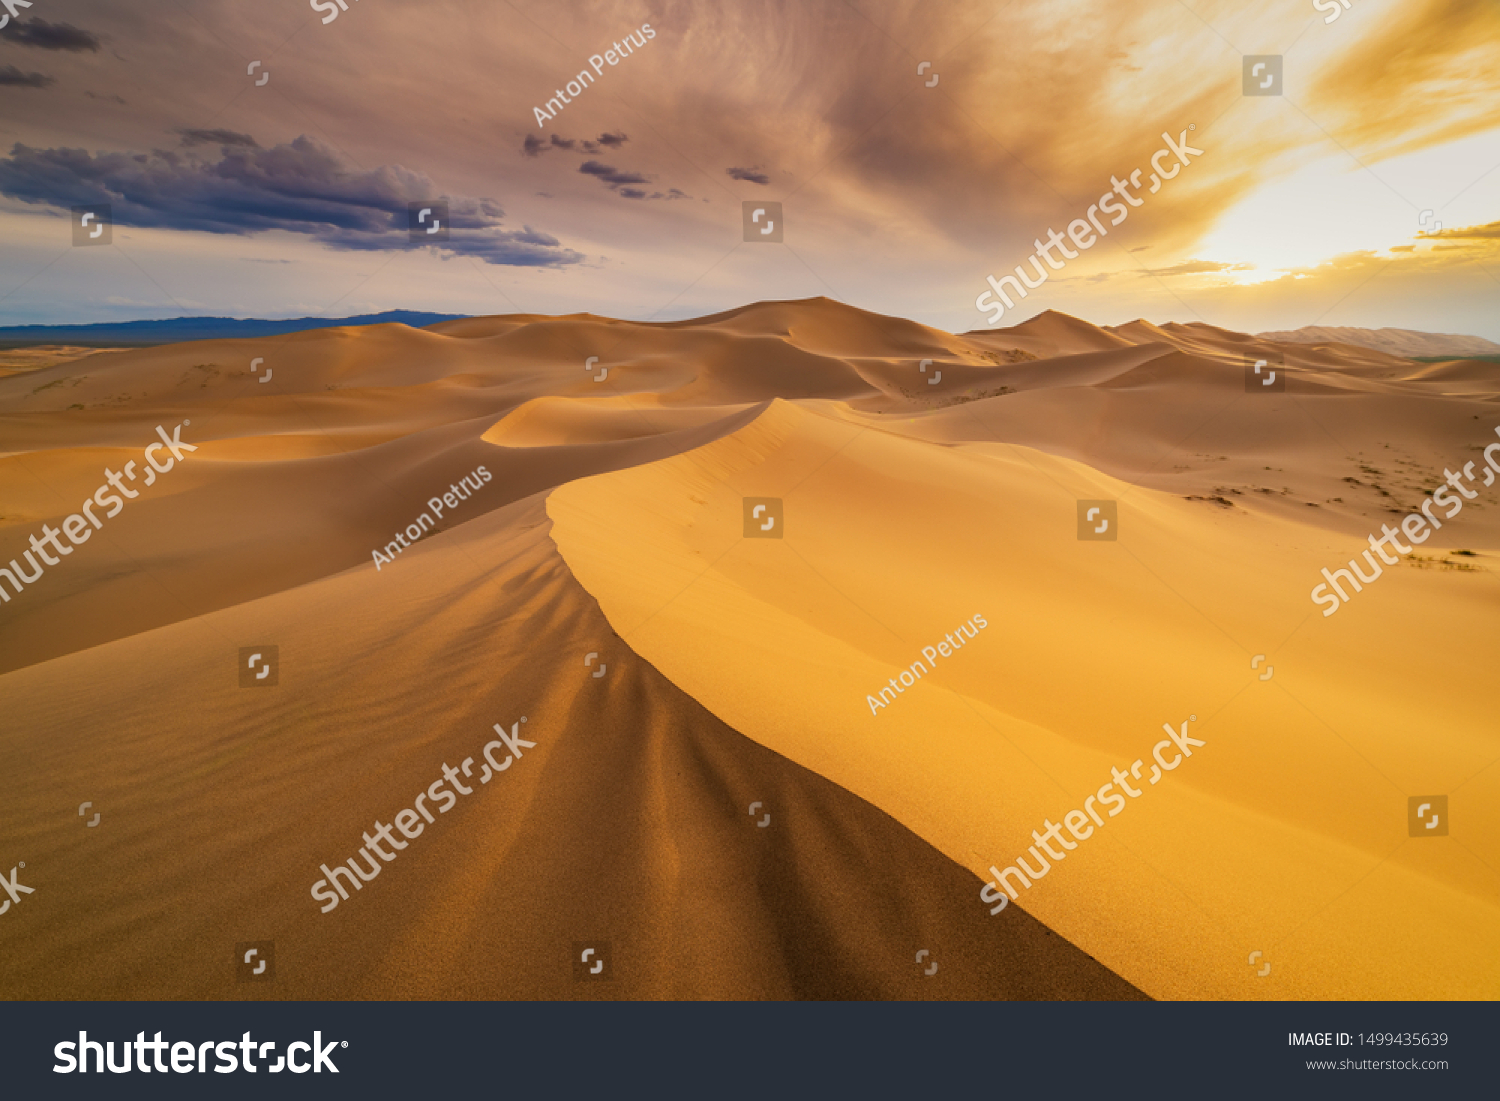 Sunset over the sand dunes in the desert. Death Valley, USA #1499435639